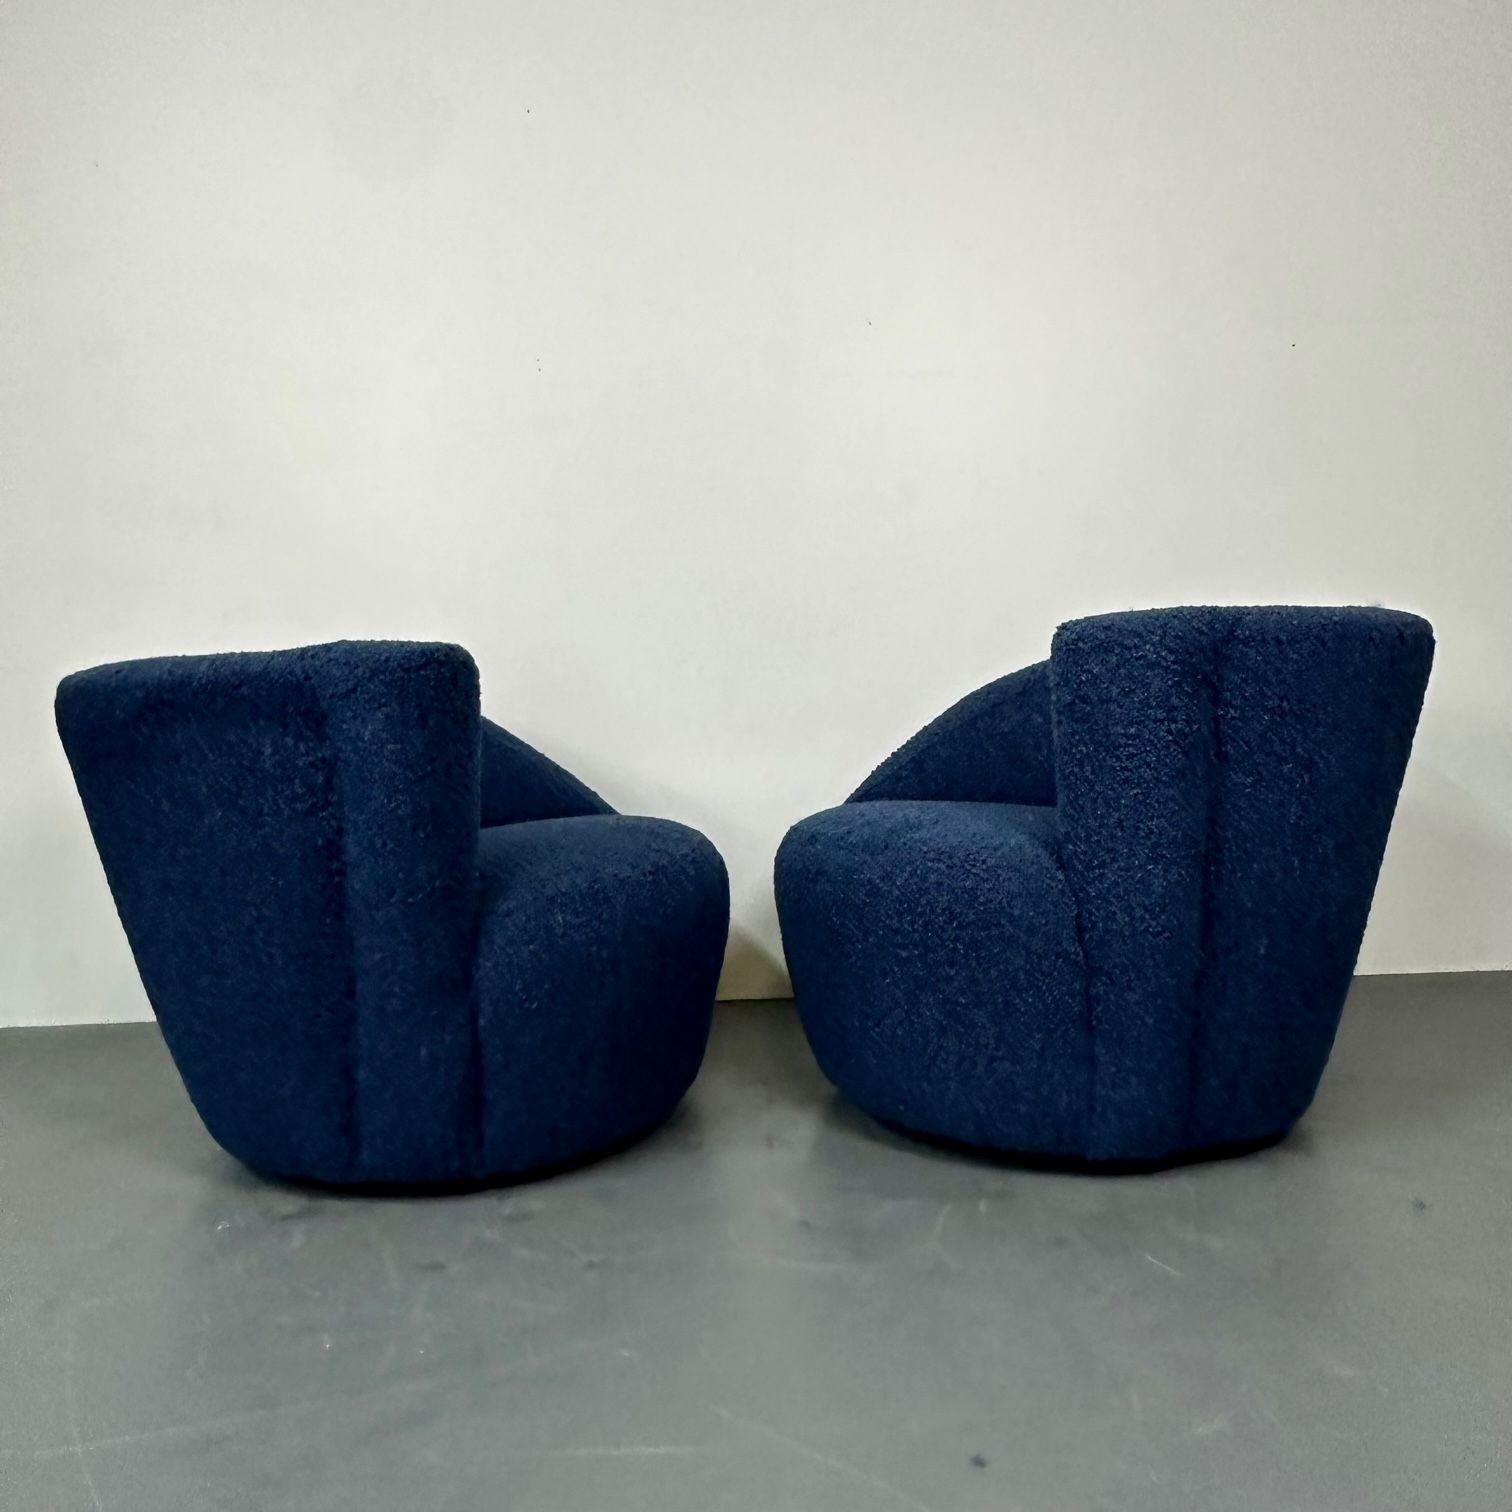 Pair of Mid-Century Modern Swivel / Lounge Chairs, Blue Faux Fur In Good Condition For Sale In Stamford, CT